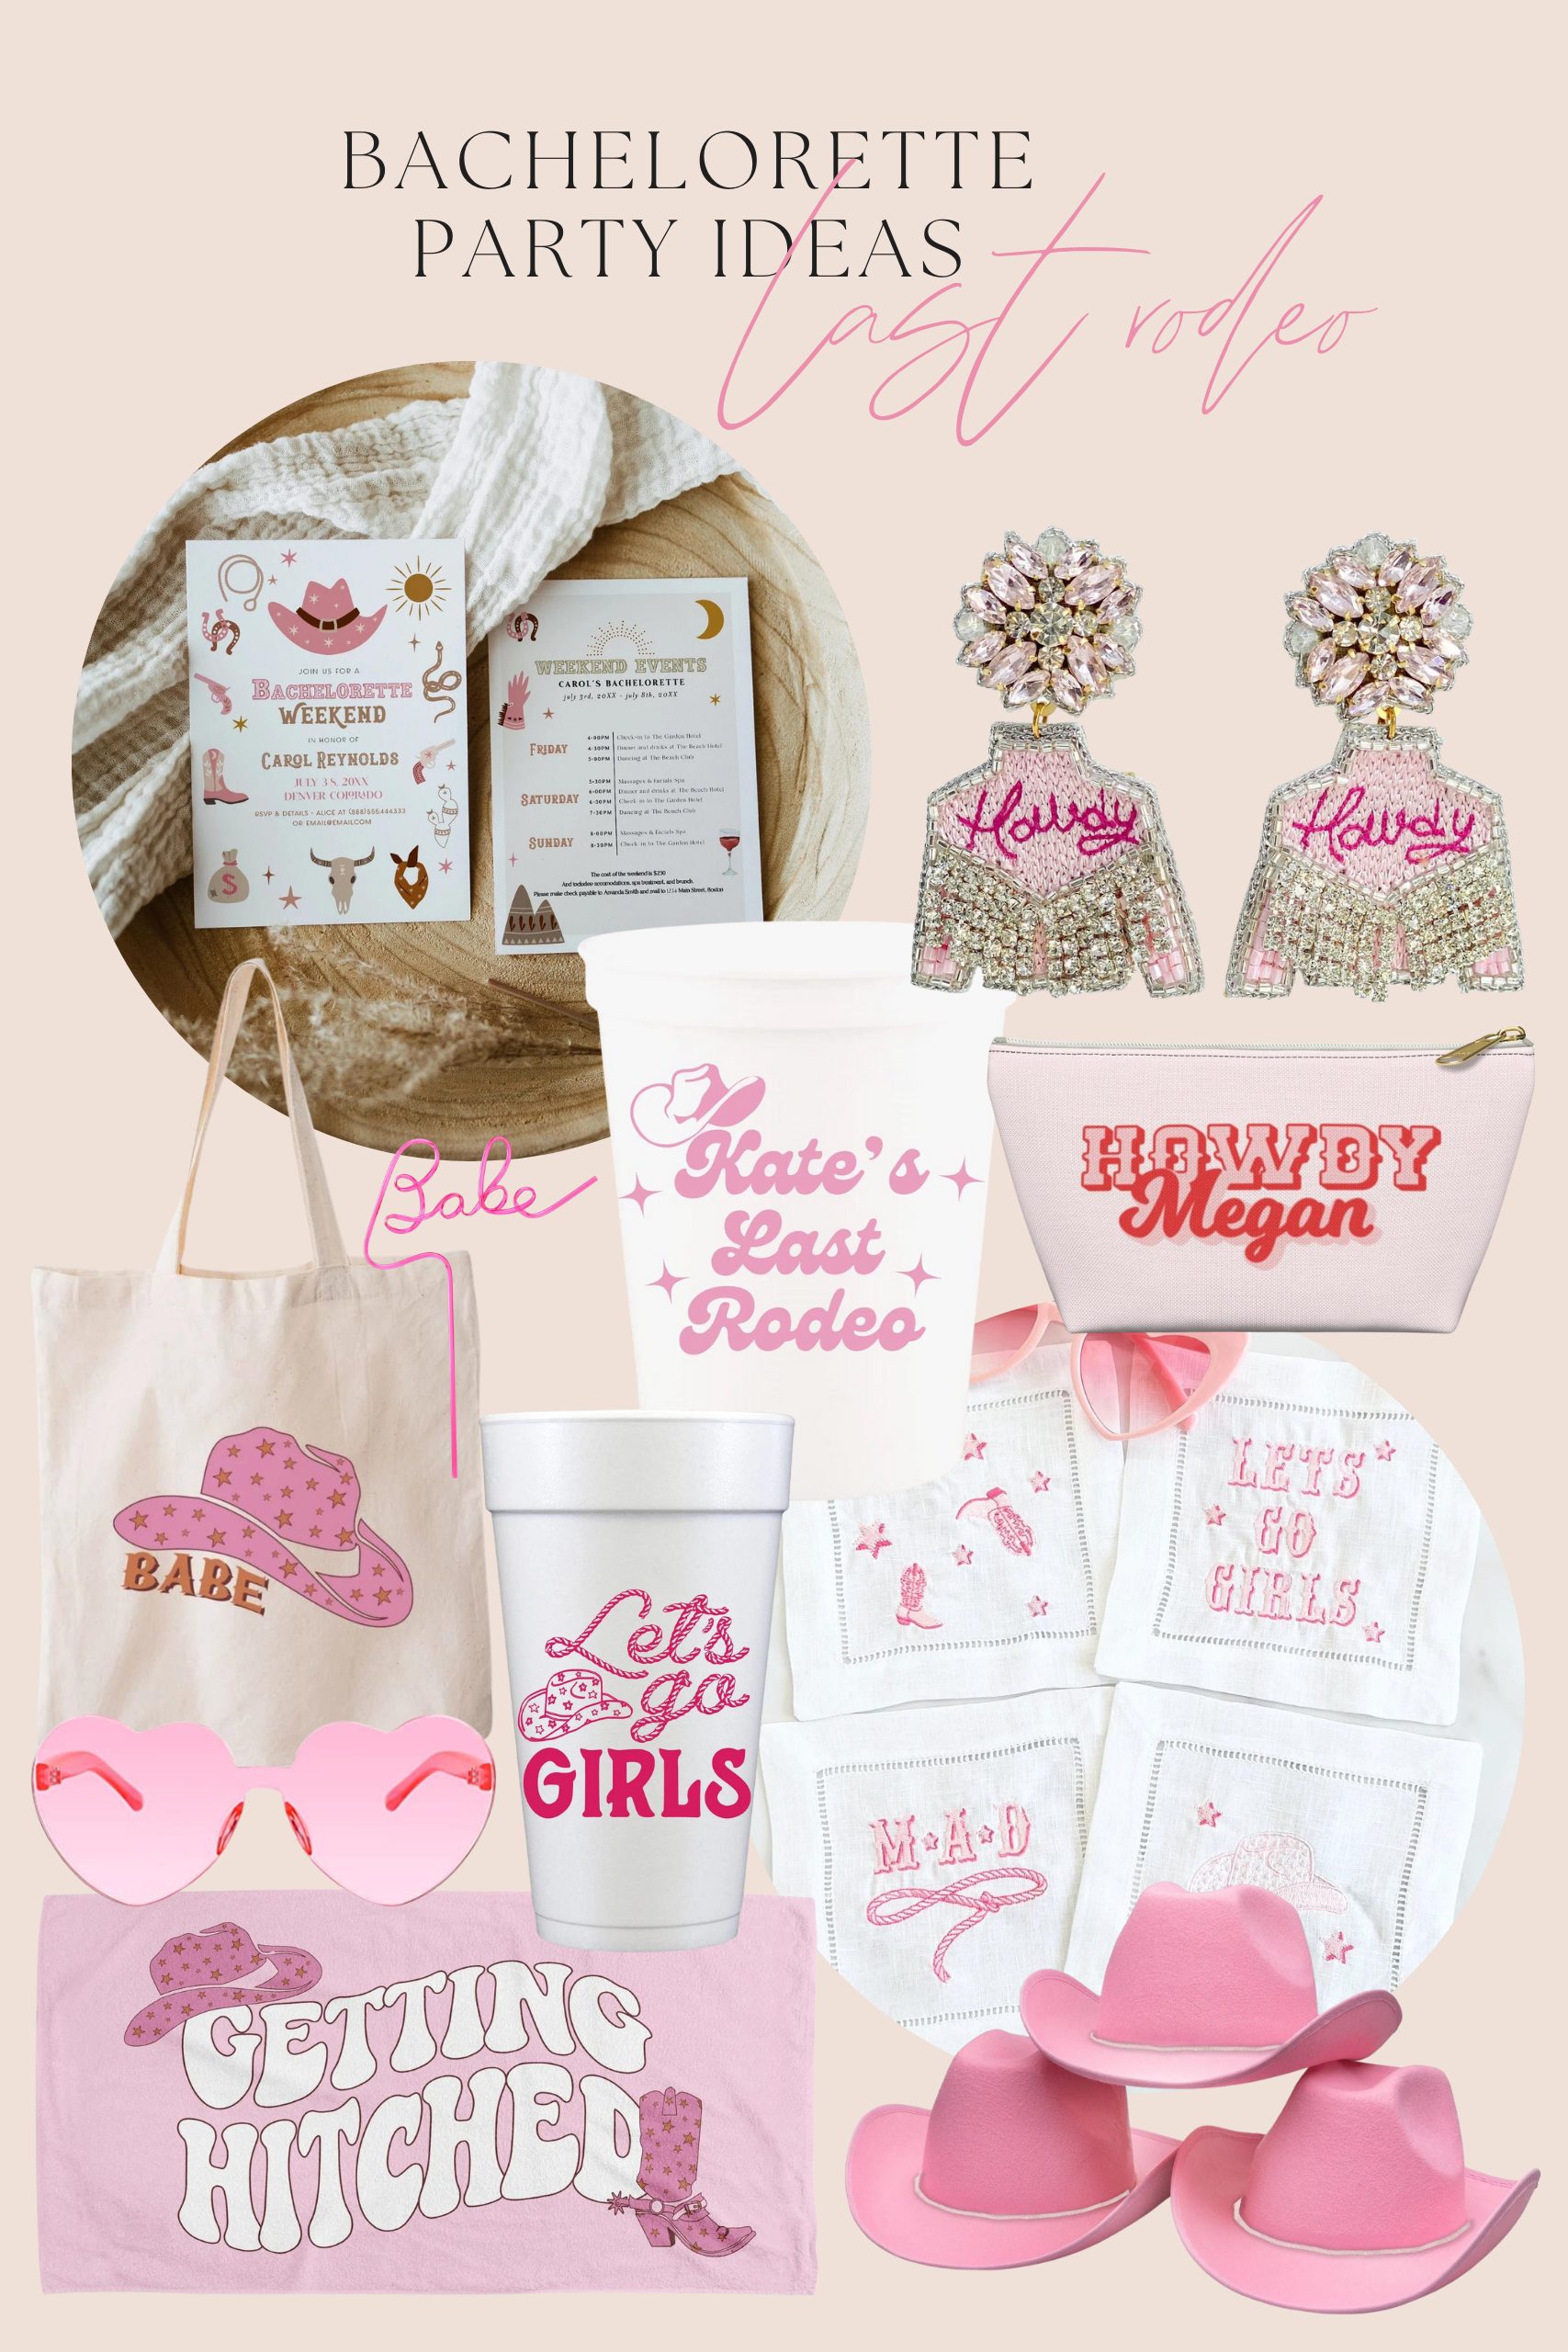 Last Rodeo Bachelorette Party, Pink Bachelorette Party, Nashville Bachelorette Party